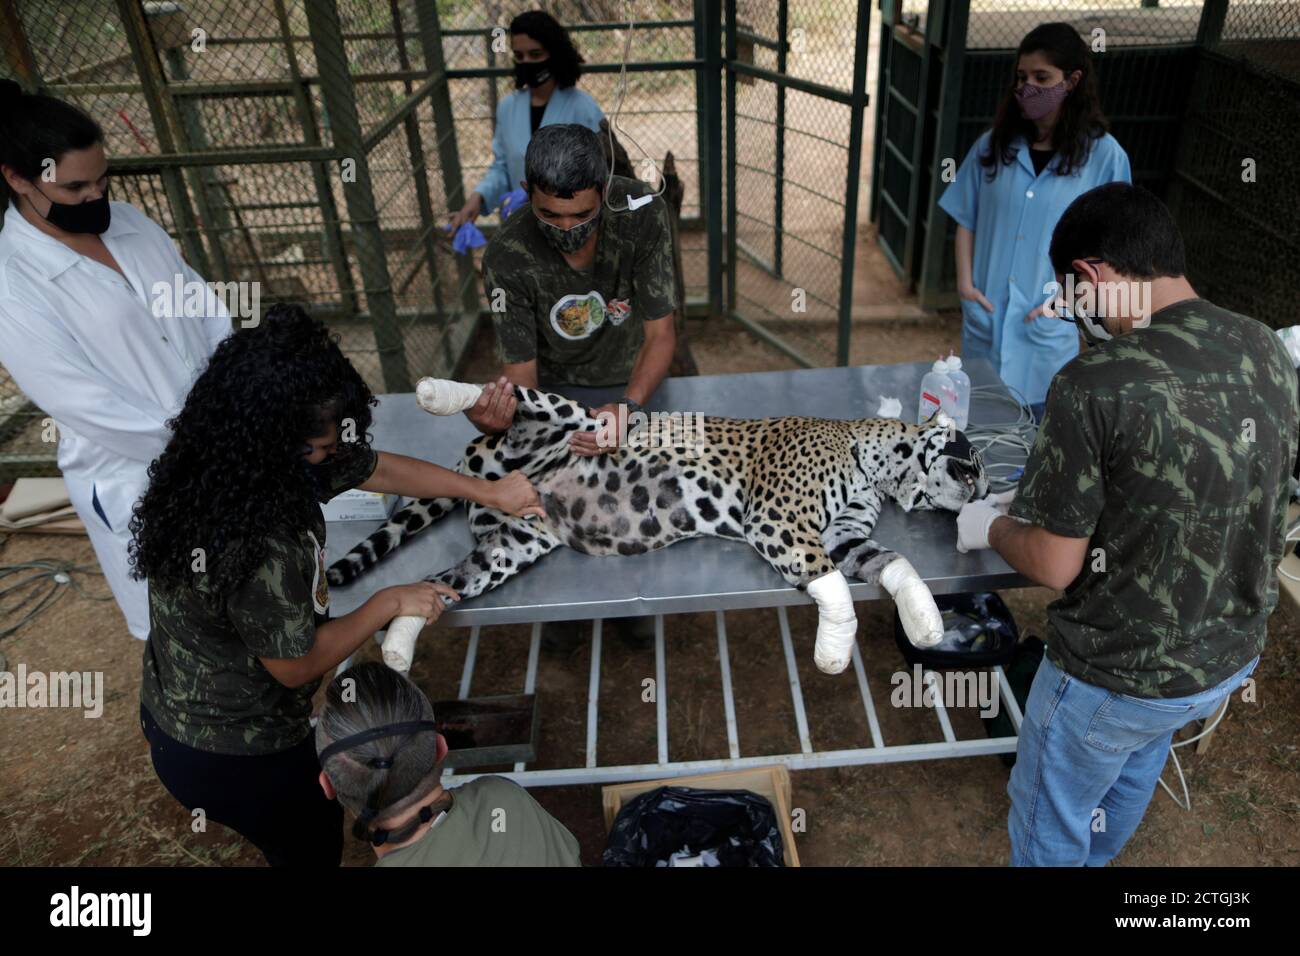 An adult female jaguar named Amanaci receives stem cell treatment on her paws after burn injuries during a fire in Pantanal, at NGO Nex Institute in Corumba de Goias, Goias State, Brazil, September 19, 2020. Picture taken September 19, 2020. REUTERS/Ueslei Marcelino Stock Photo